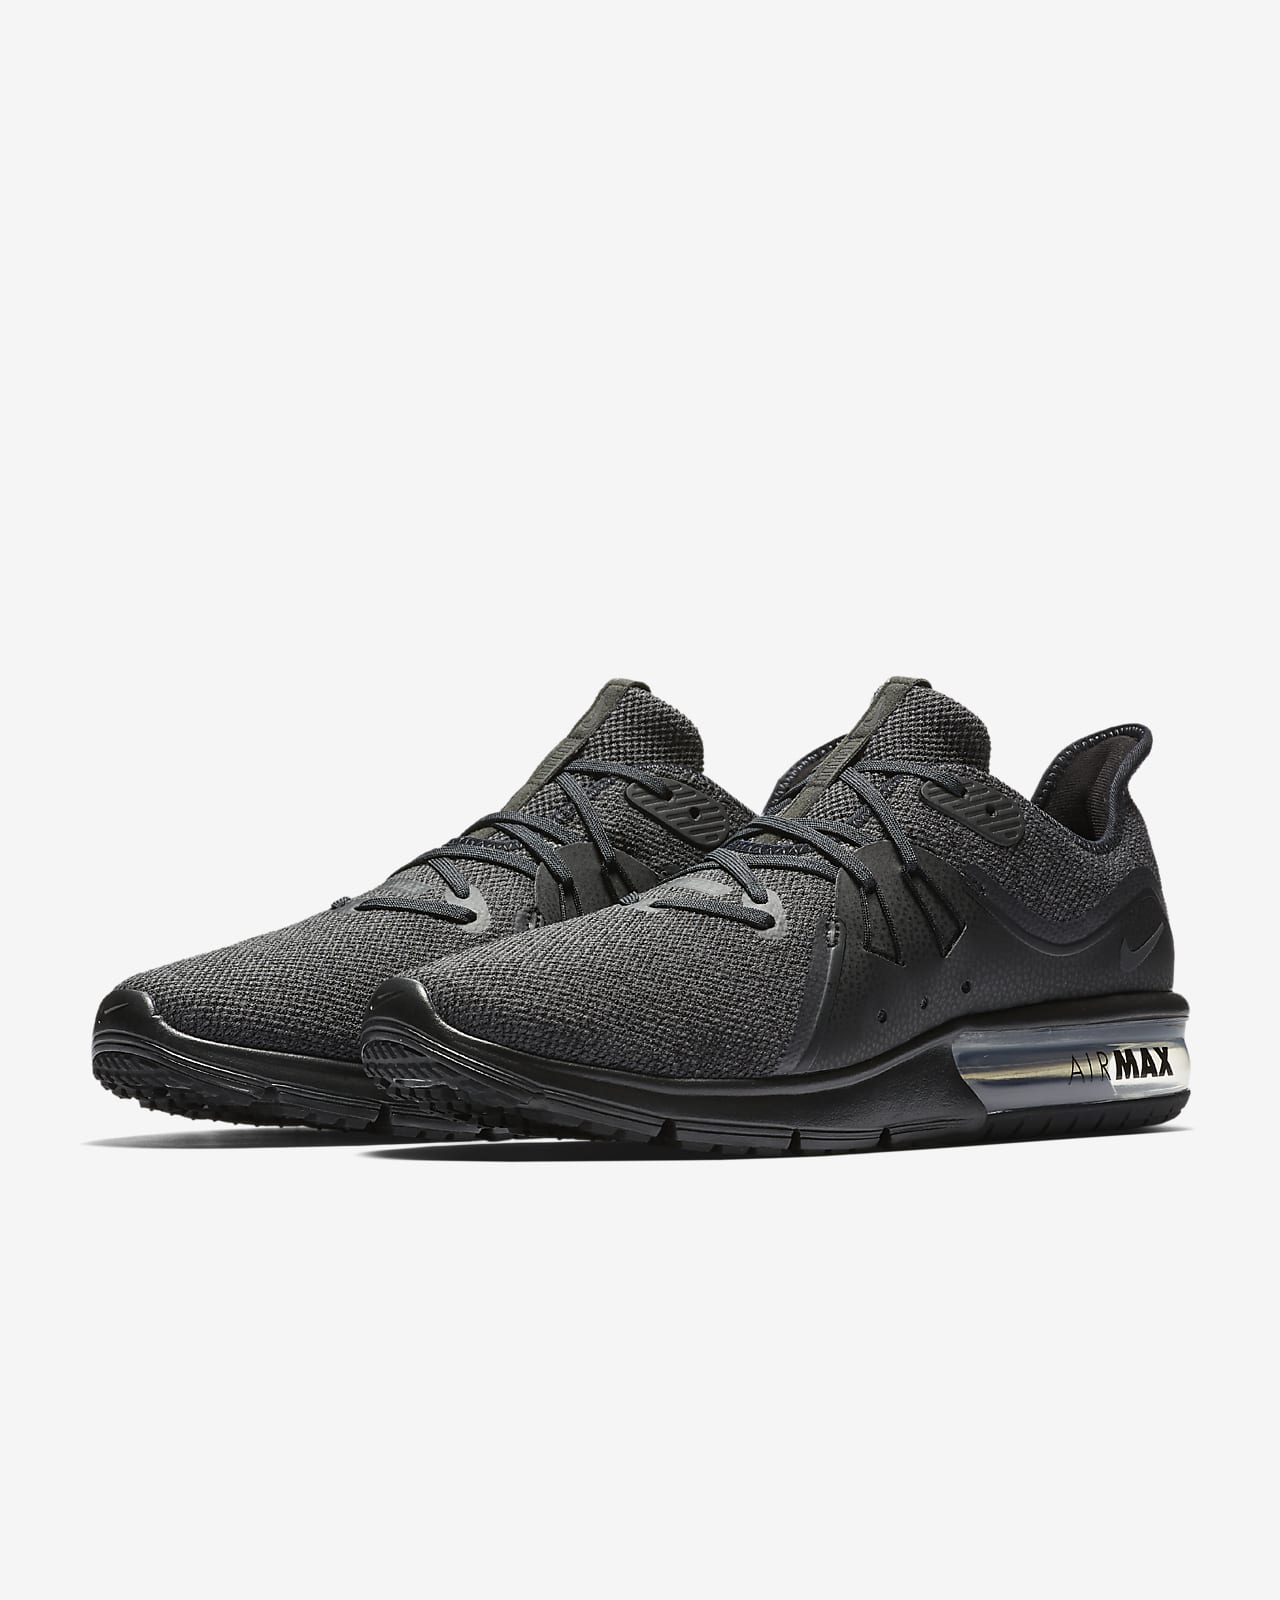 nike sequent 3 mens